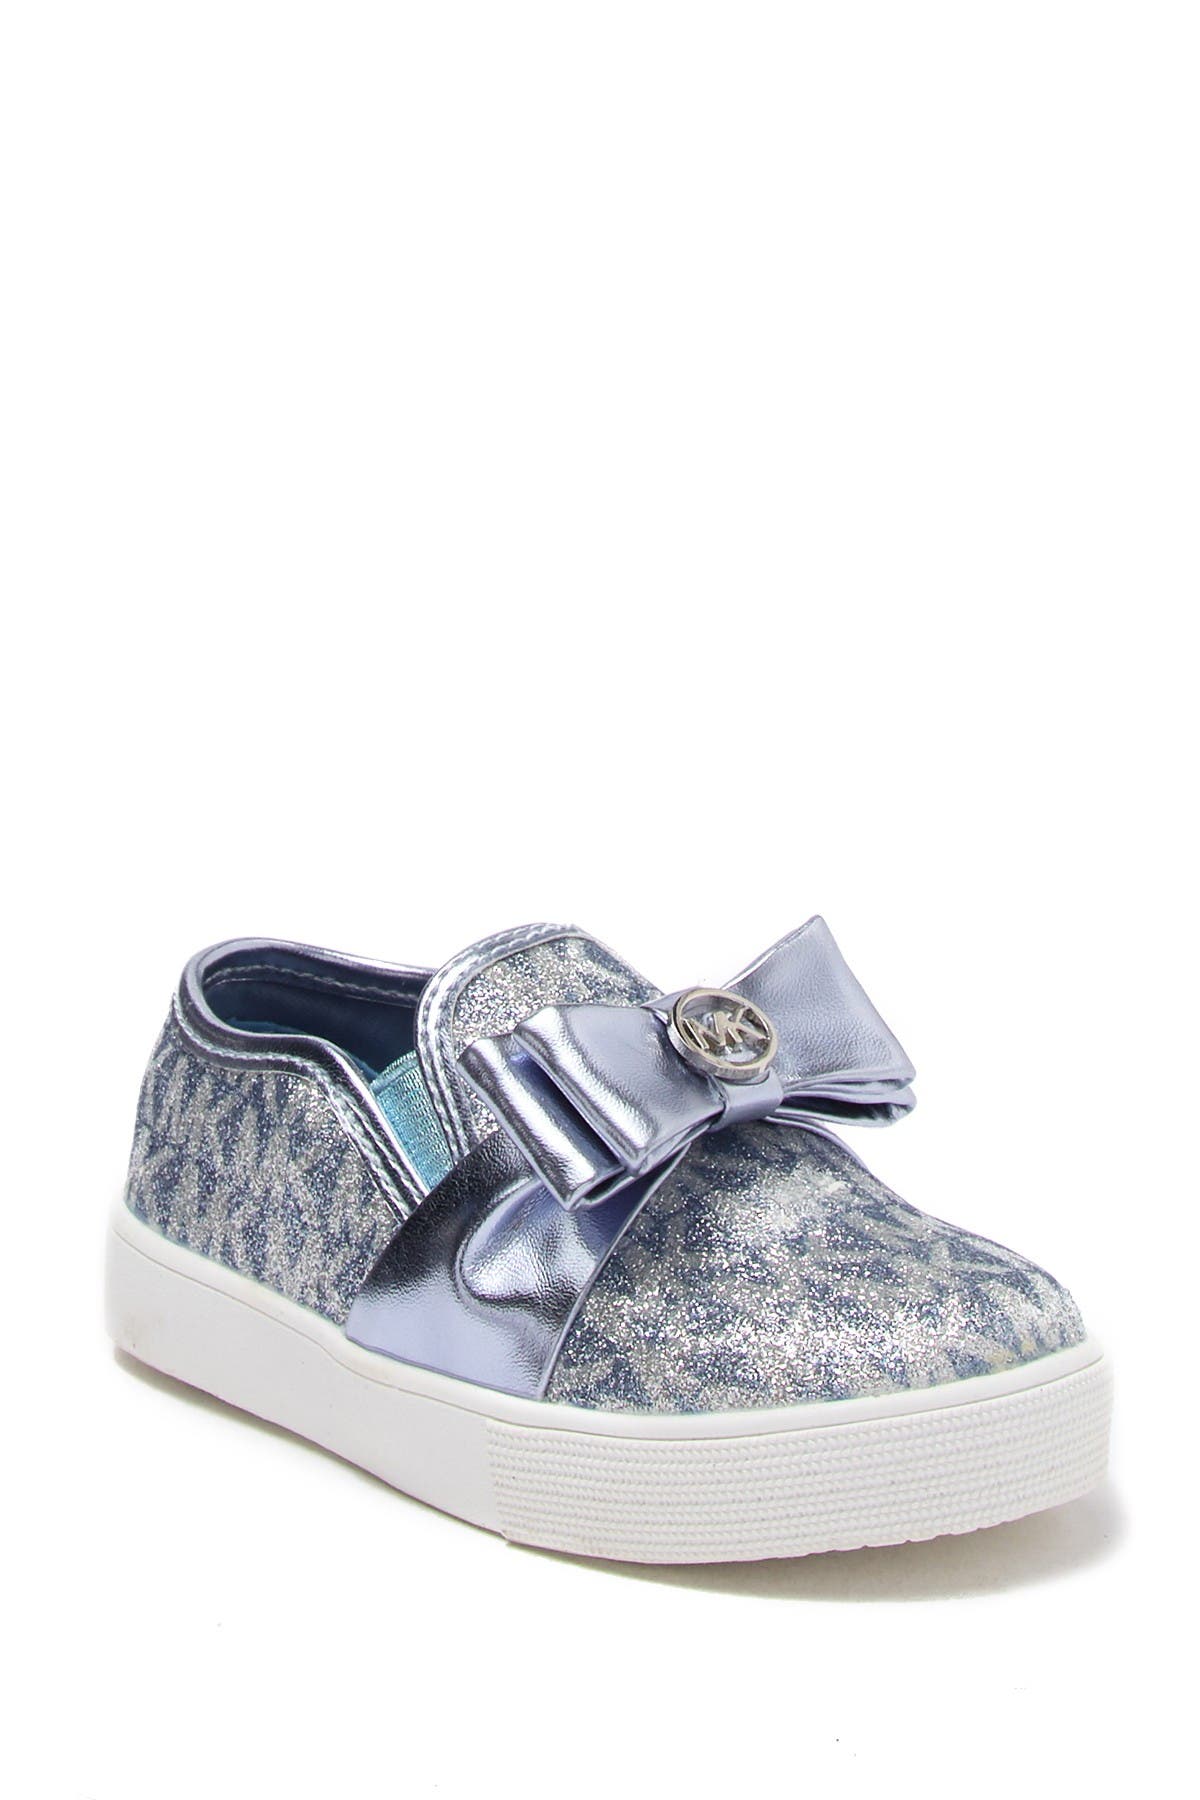 michael kors sneakers with bow